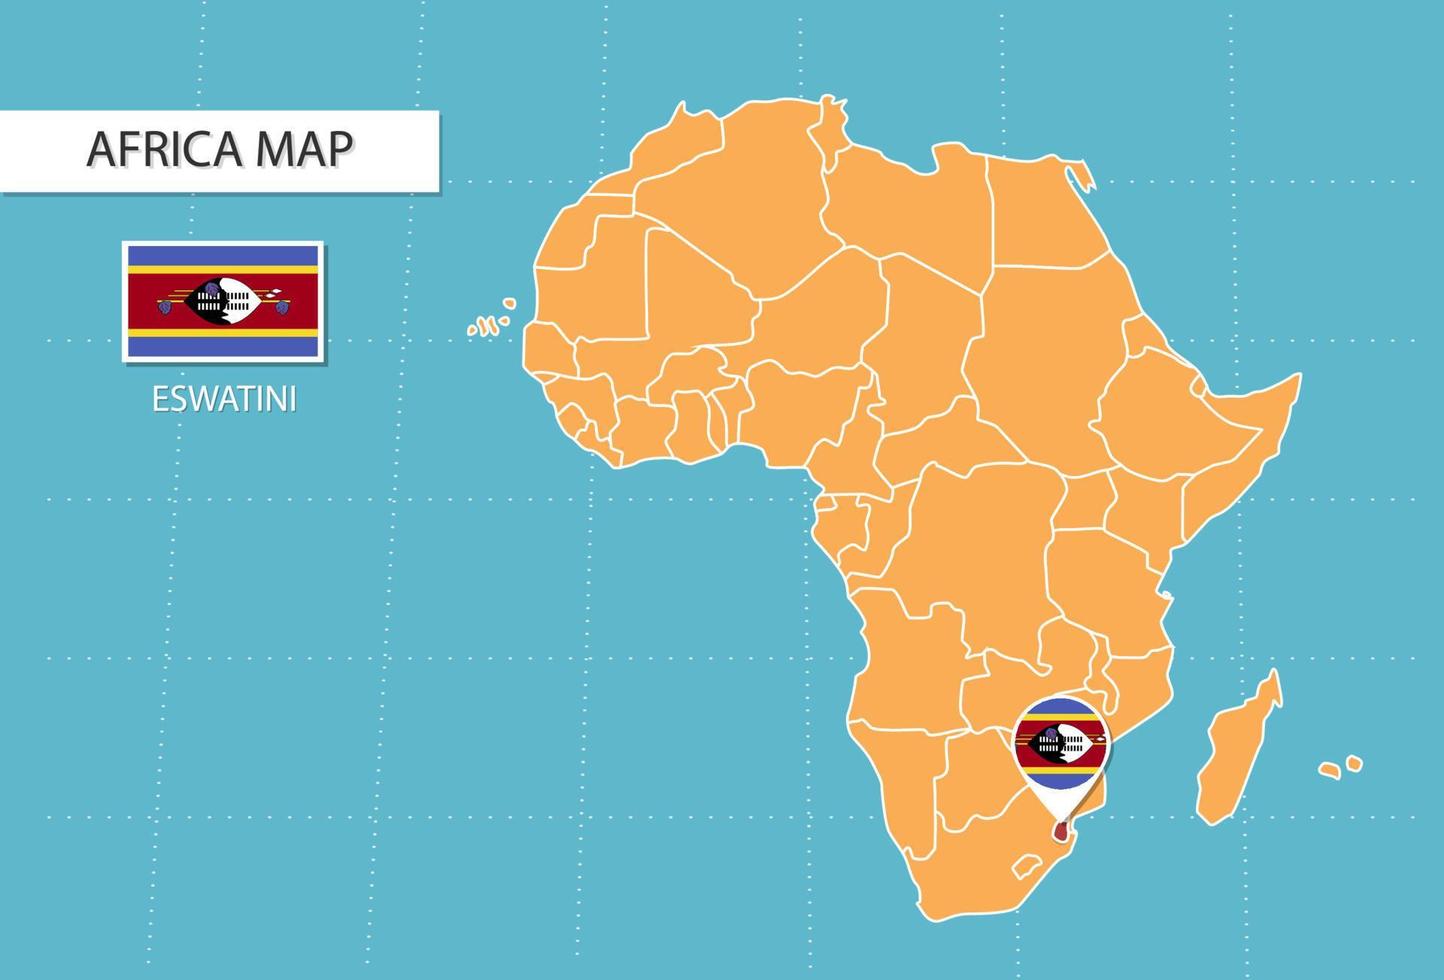 Eswatini map in Africa, icons showing Eswatini location and flags. vector